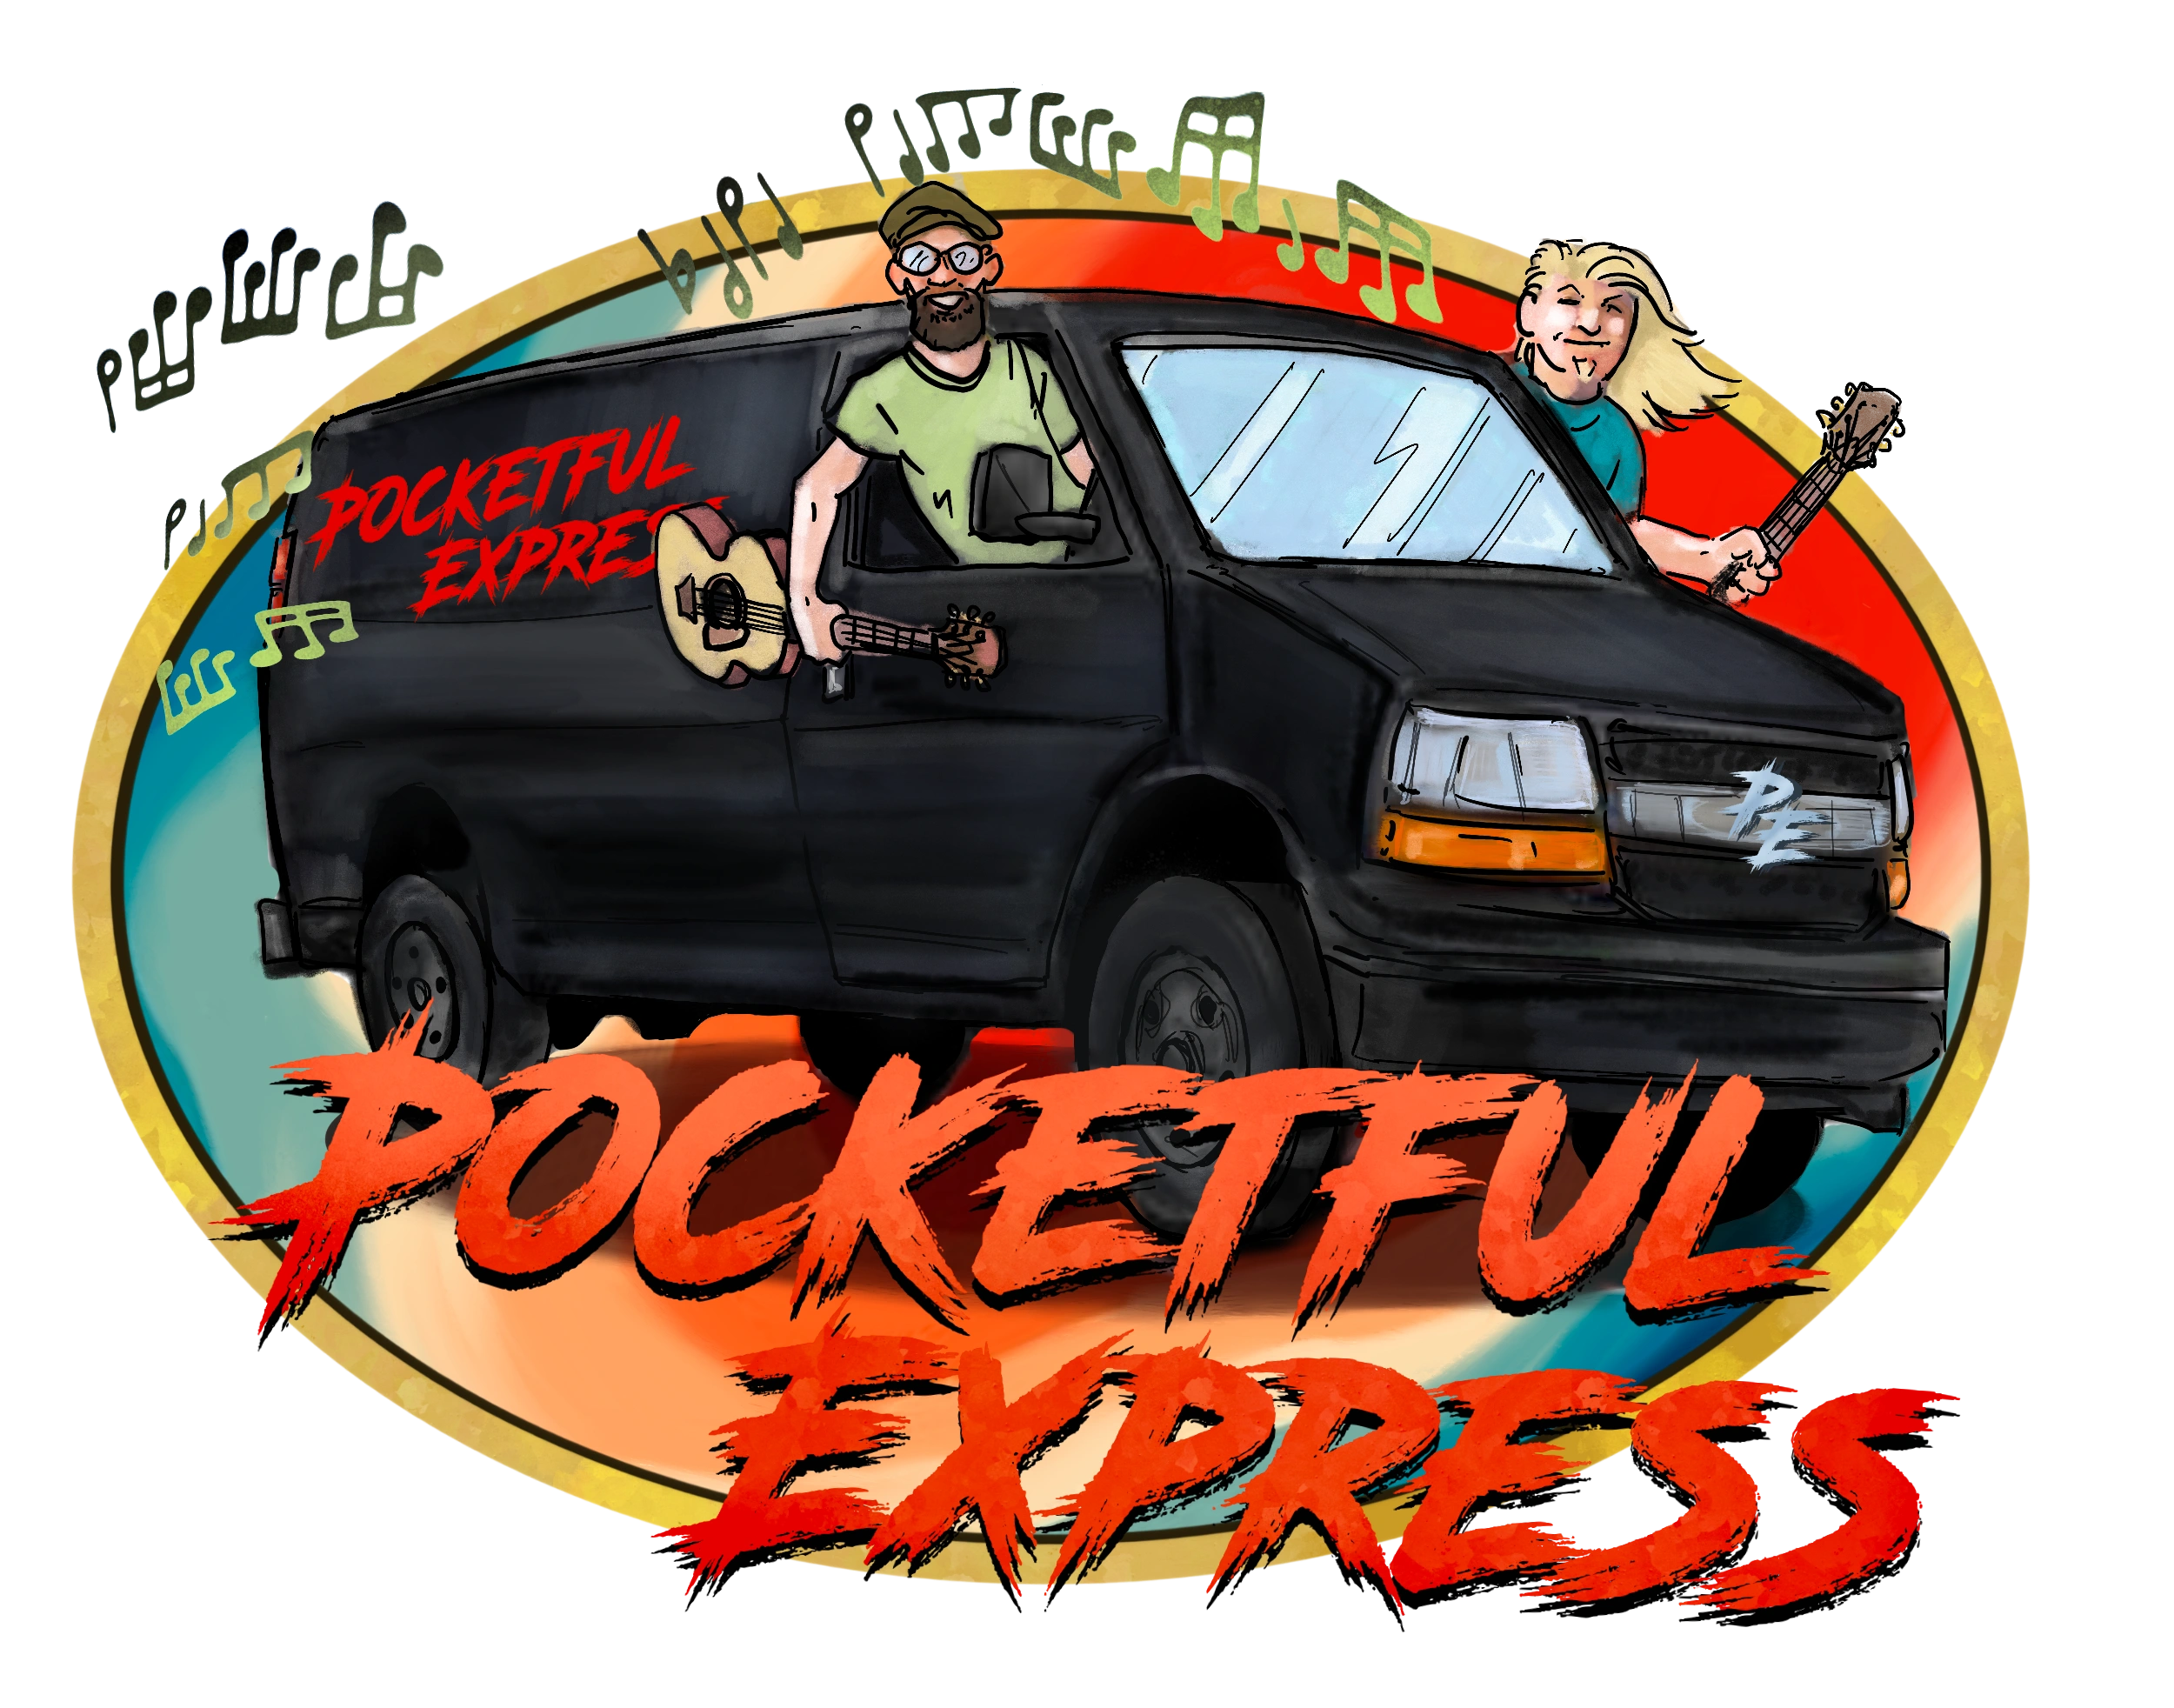 POCKETFUL Express
The Ultimate Pub-Rock Experience 